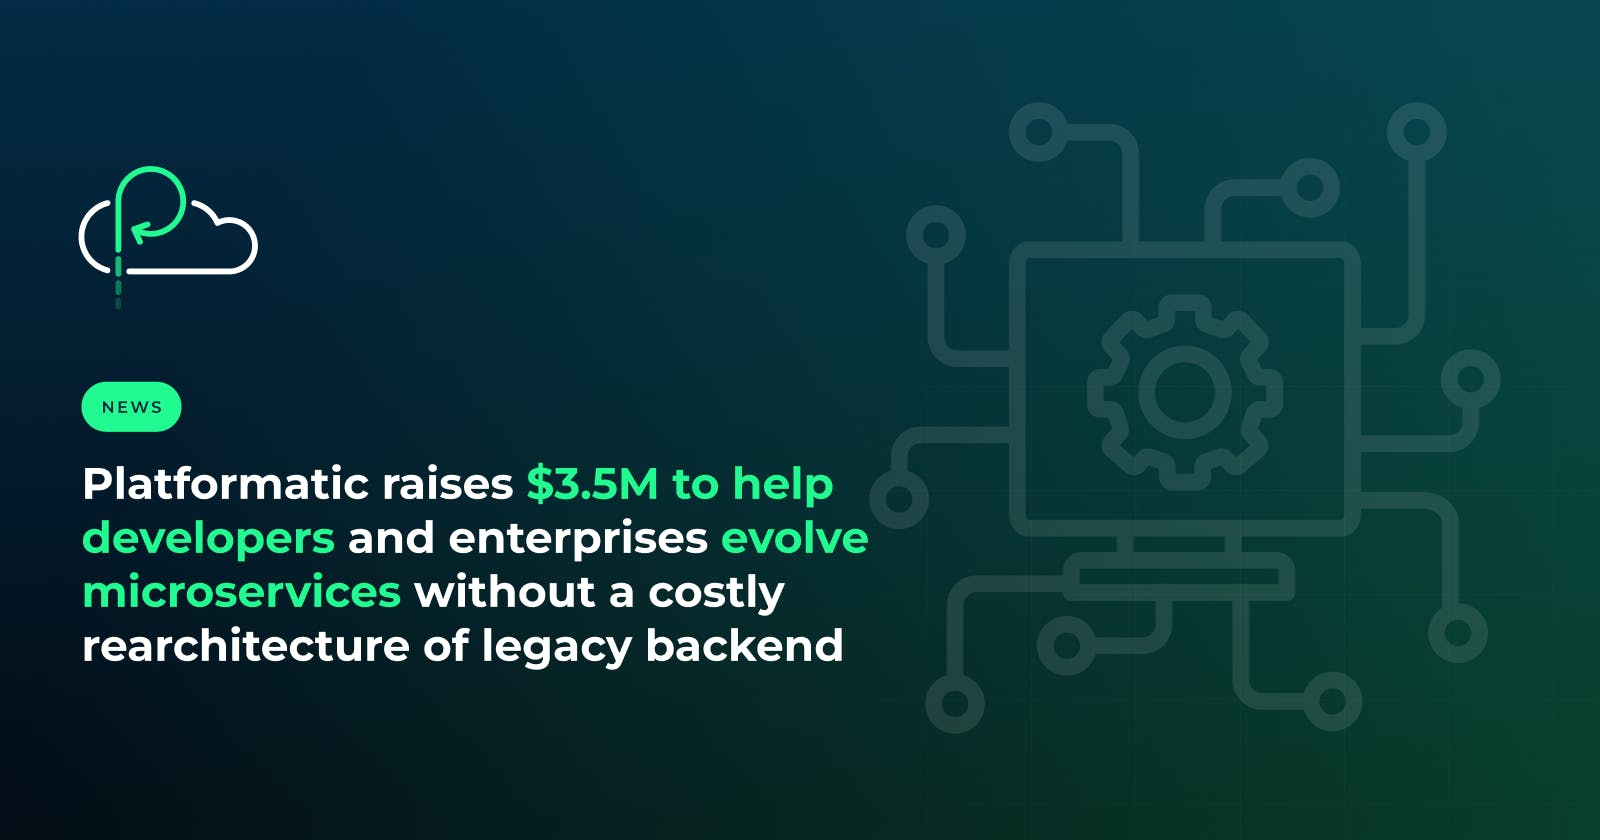 Platformatic Raises $3.5M to Help Developers and Enterprises Evolve Microservices Without a Costly Rearchitecture of Legacy Backend